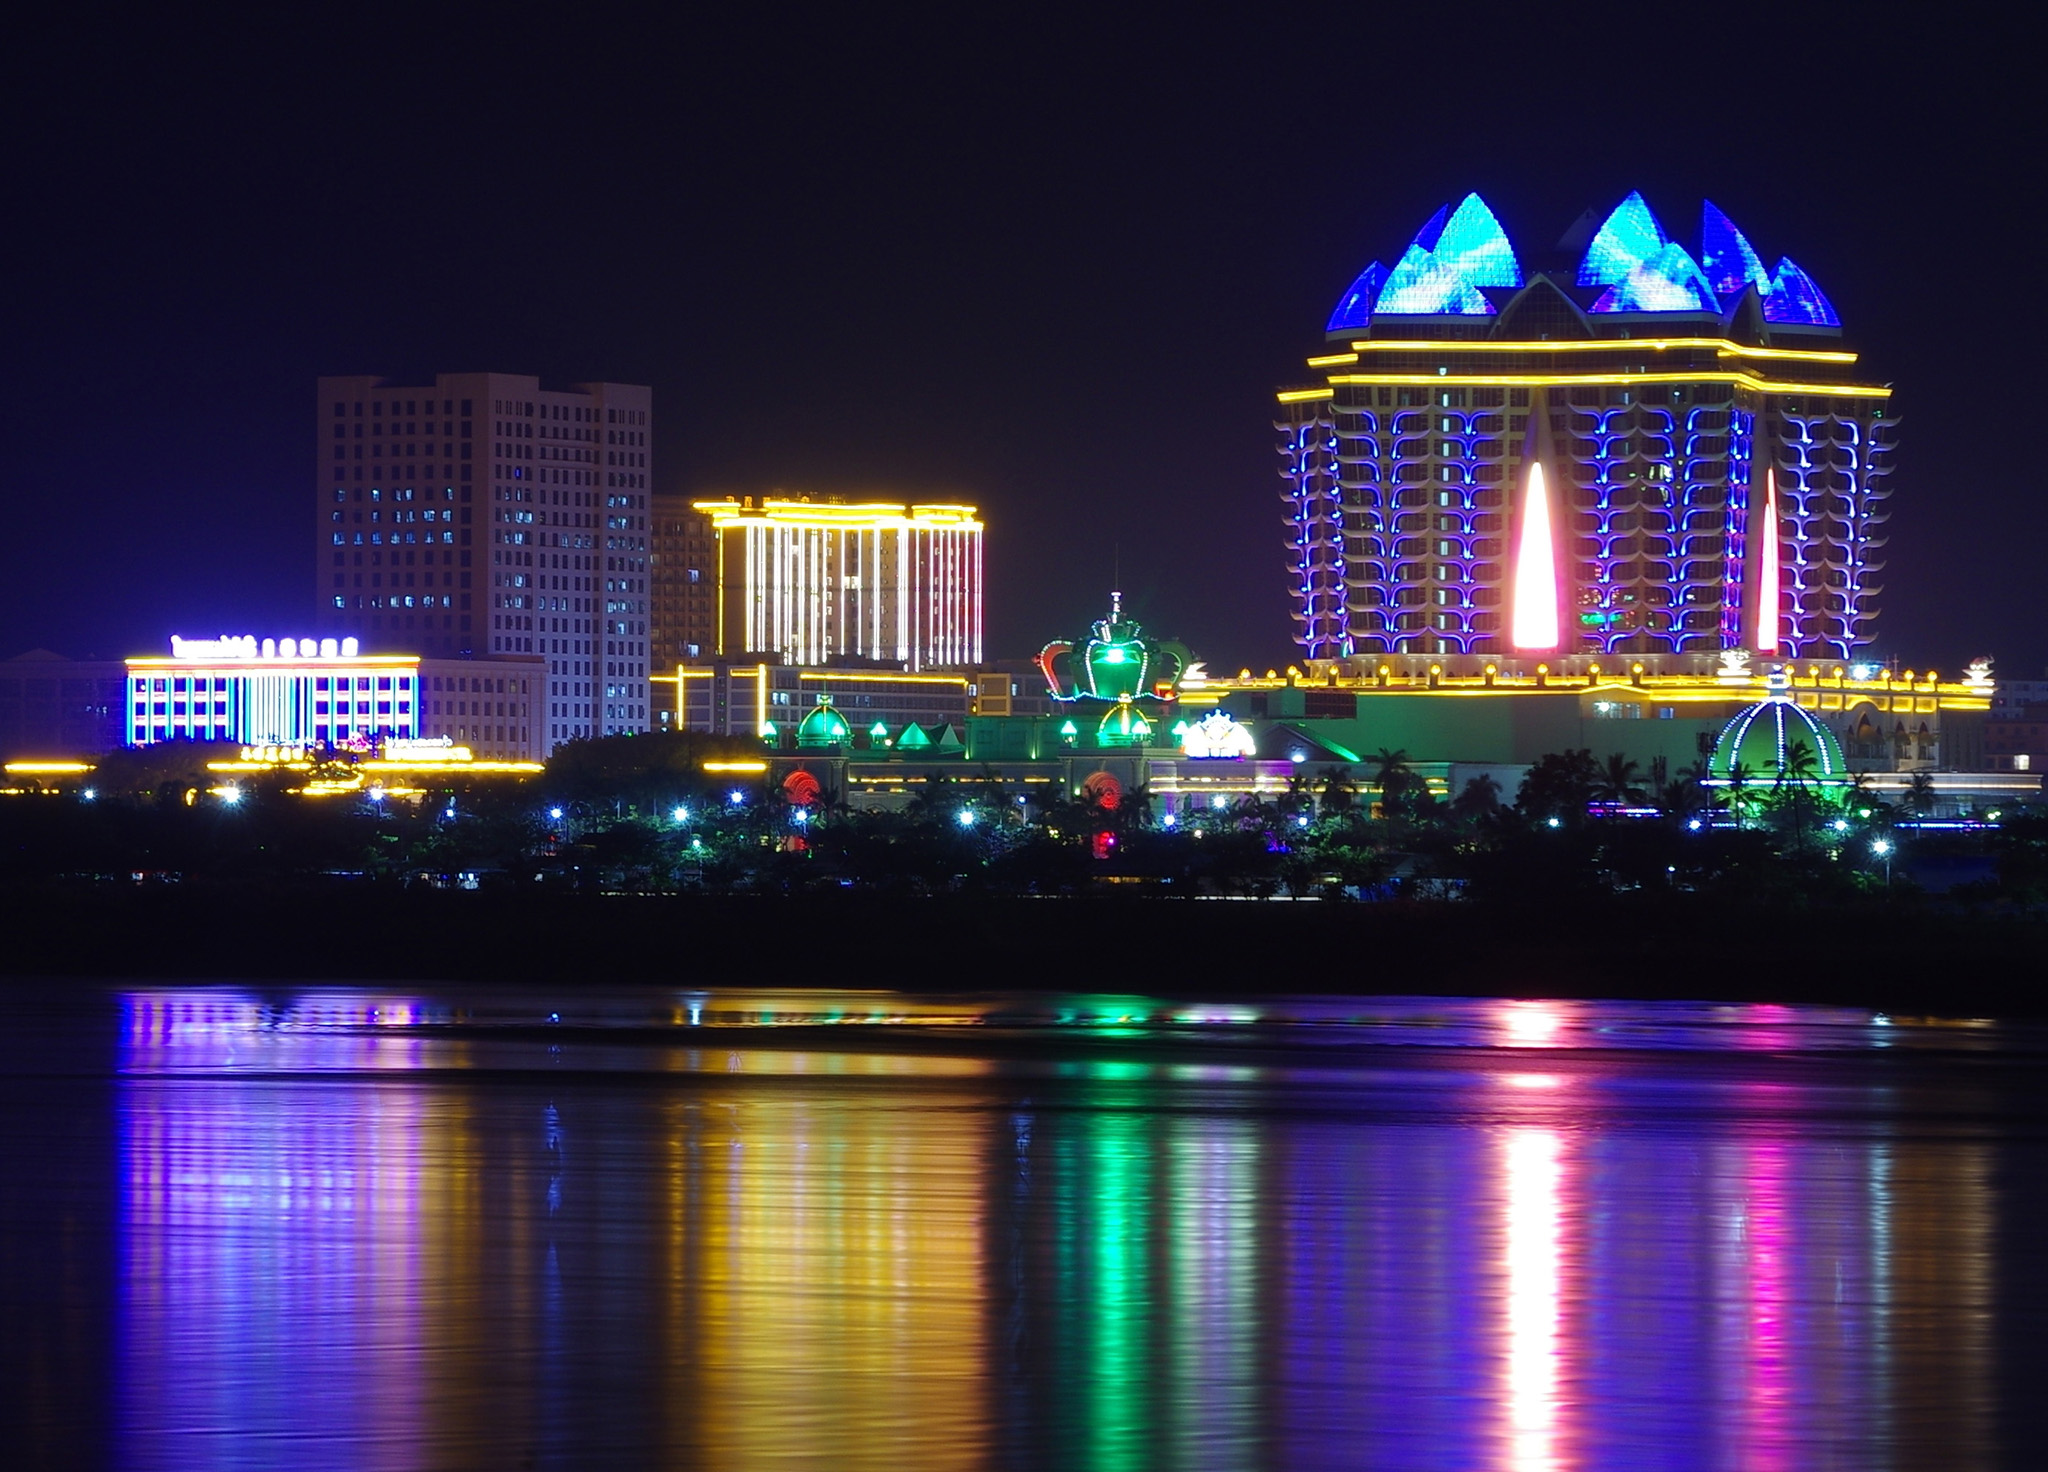 The Kings Romans Casino, shown here on December 5, 2020, is located along the Mekong River in Laos. During the COVID-19 pandemic, empty casinos in Southeast Asia pivoted to housing online scam operations. (Photo by Nongwean3/Shutterstock)